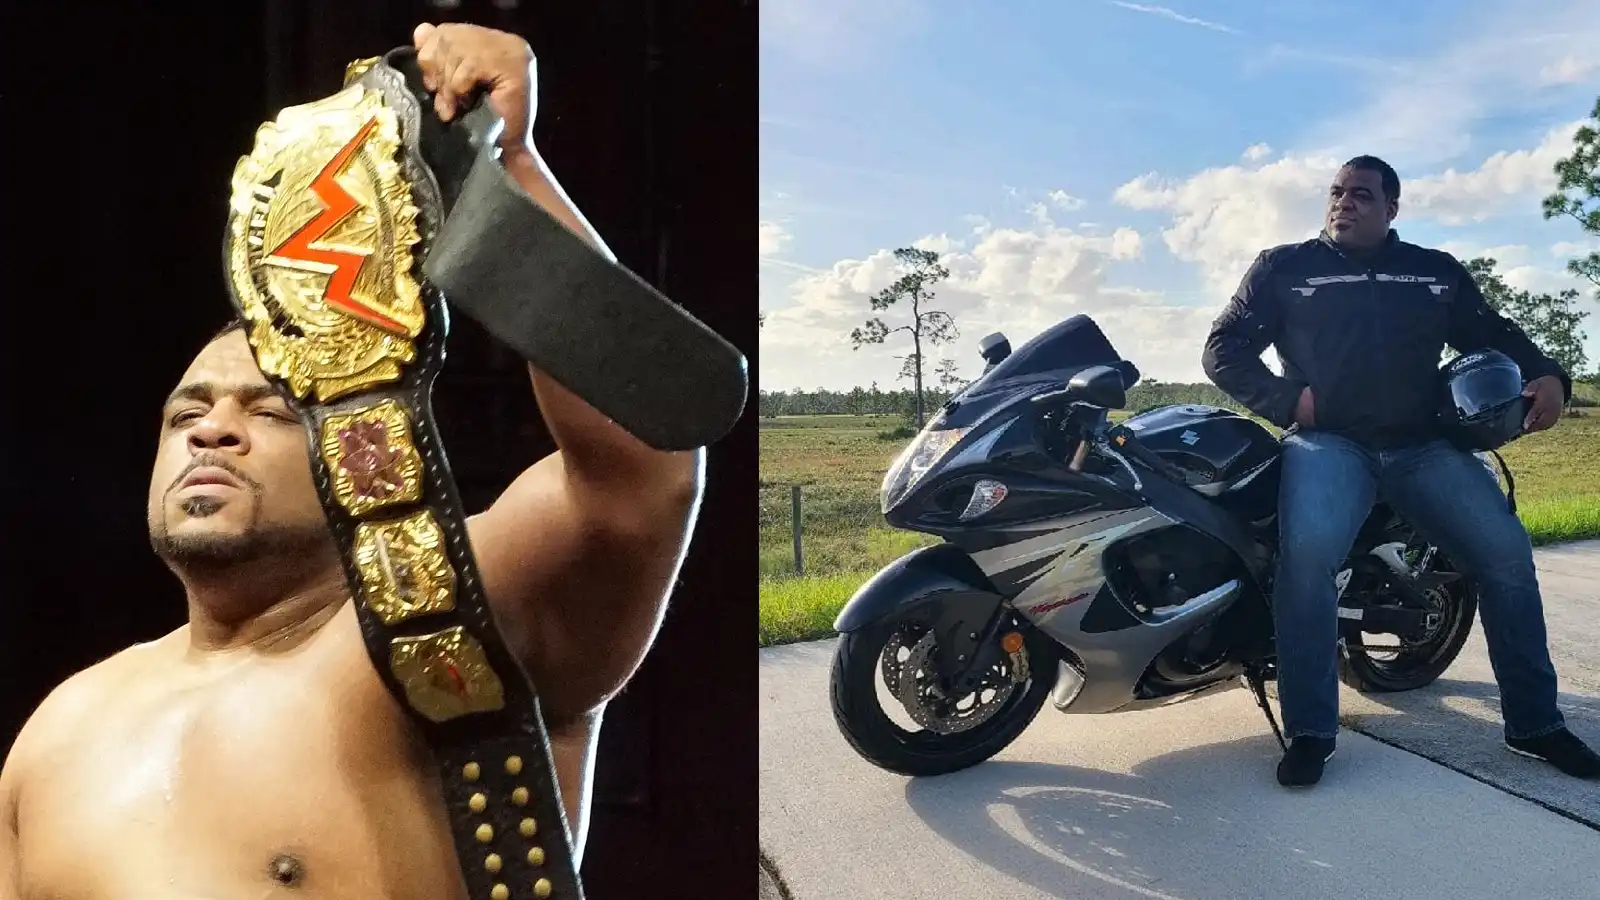 Keith Lee Net worth 2022, WWE Salary, Endorsements, Houses, Cars Collection, Etc.